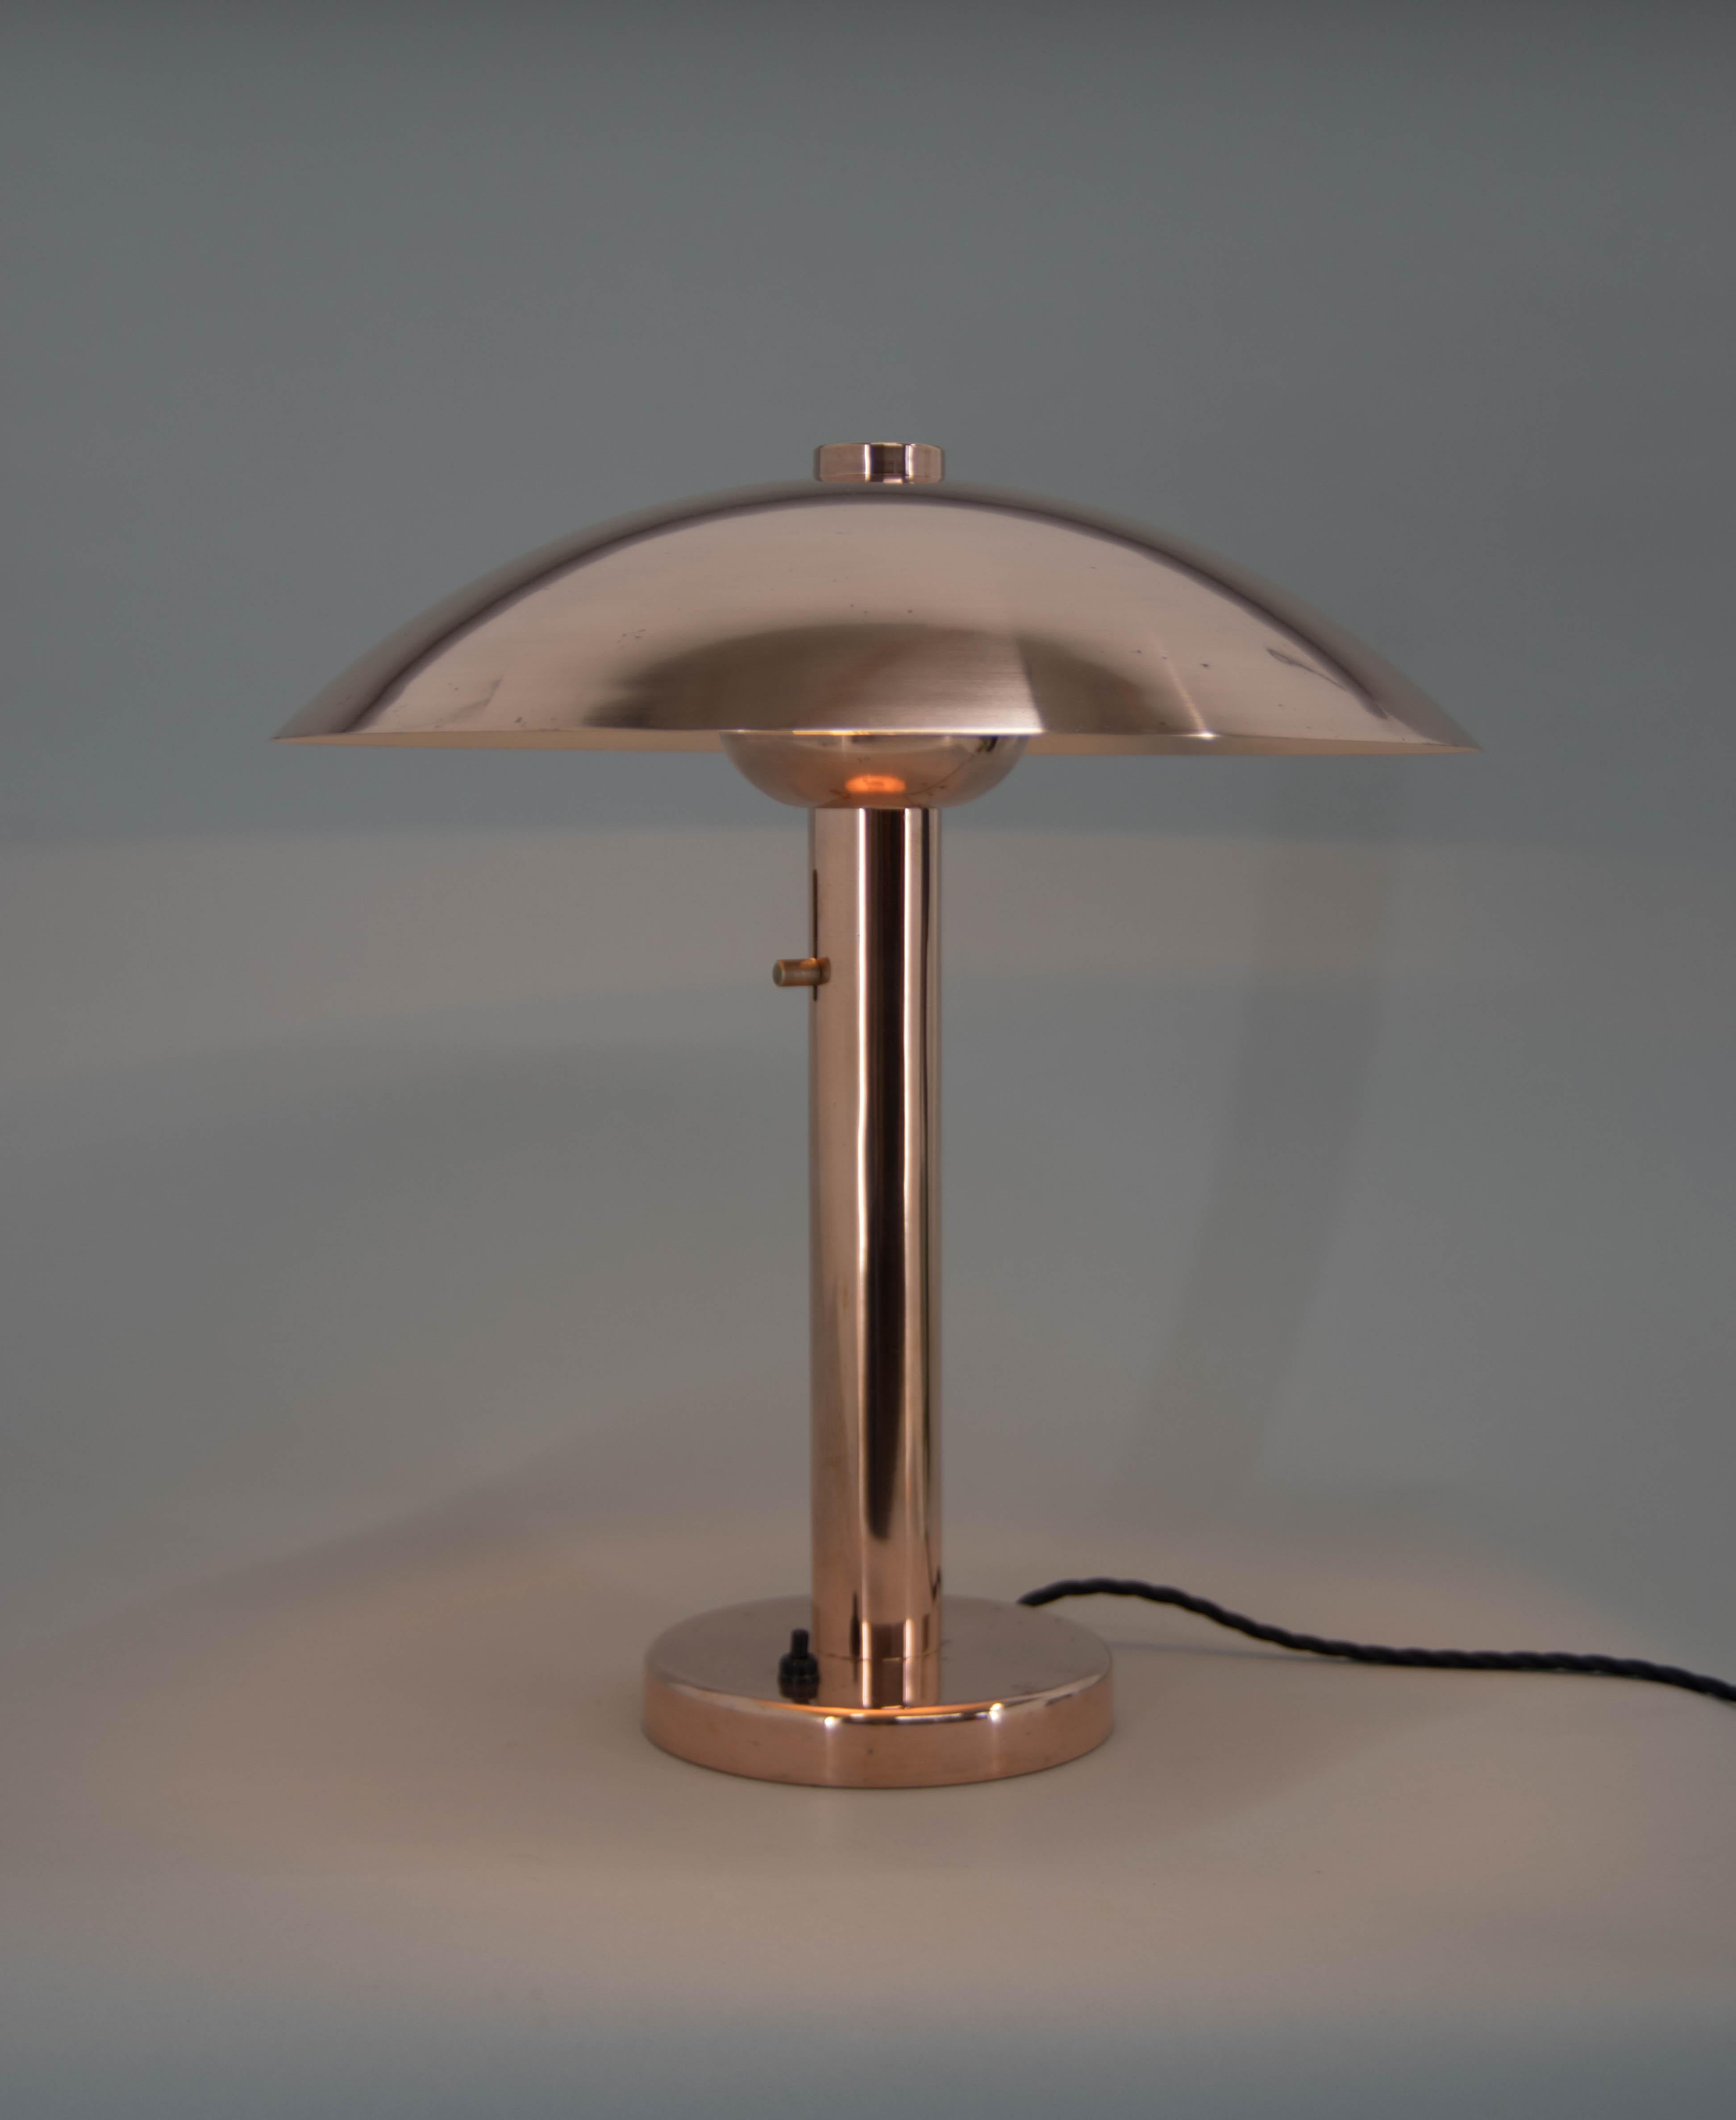 Big version of mushroom table lamp made of copper. Adjustable height of the bulb.
Restored: surface refinished, new silver paint on a bottom part of shade, rewired.
1x60W, E25-E27 bulb.
US plug adapter included.